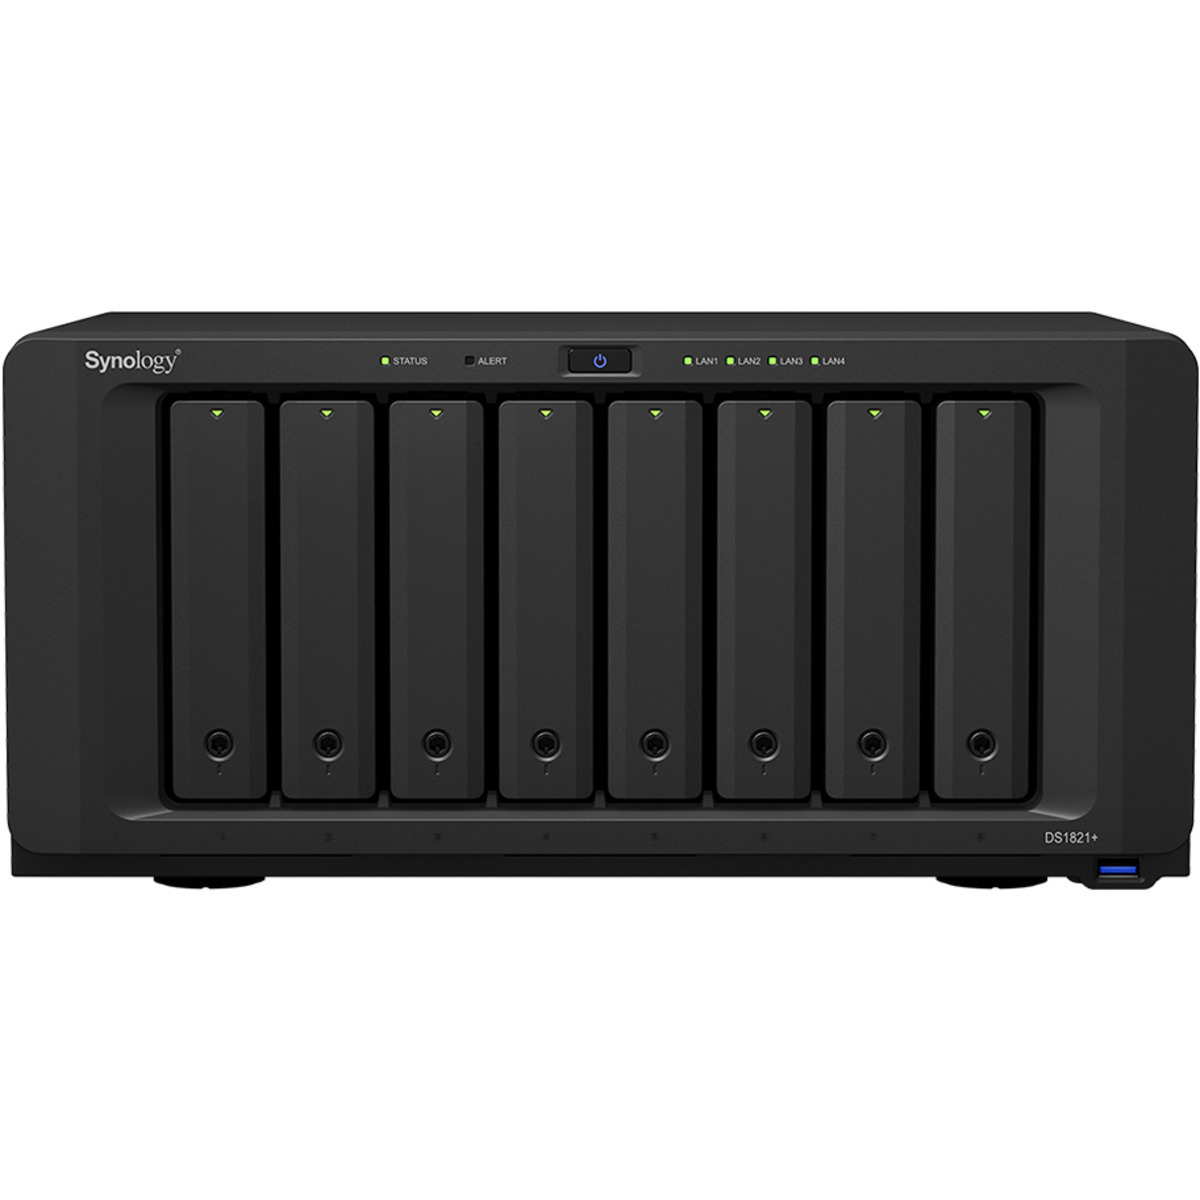 Synology DiskStation DS1821+ 32tb 8-Bay Desktop Multimedia / Power User / Business NAS - Network Attached Storage Device 8x4tb Sandisk Ultra 3D SDSSDH3-4T00 2.5 560/520MB/s SATA 6Gb/s SSD CONSUMER Class Drives Installed - Burn-In Tested - FREE RAM UPGRADE DiskStation DS1821+